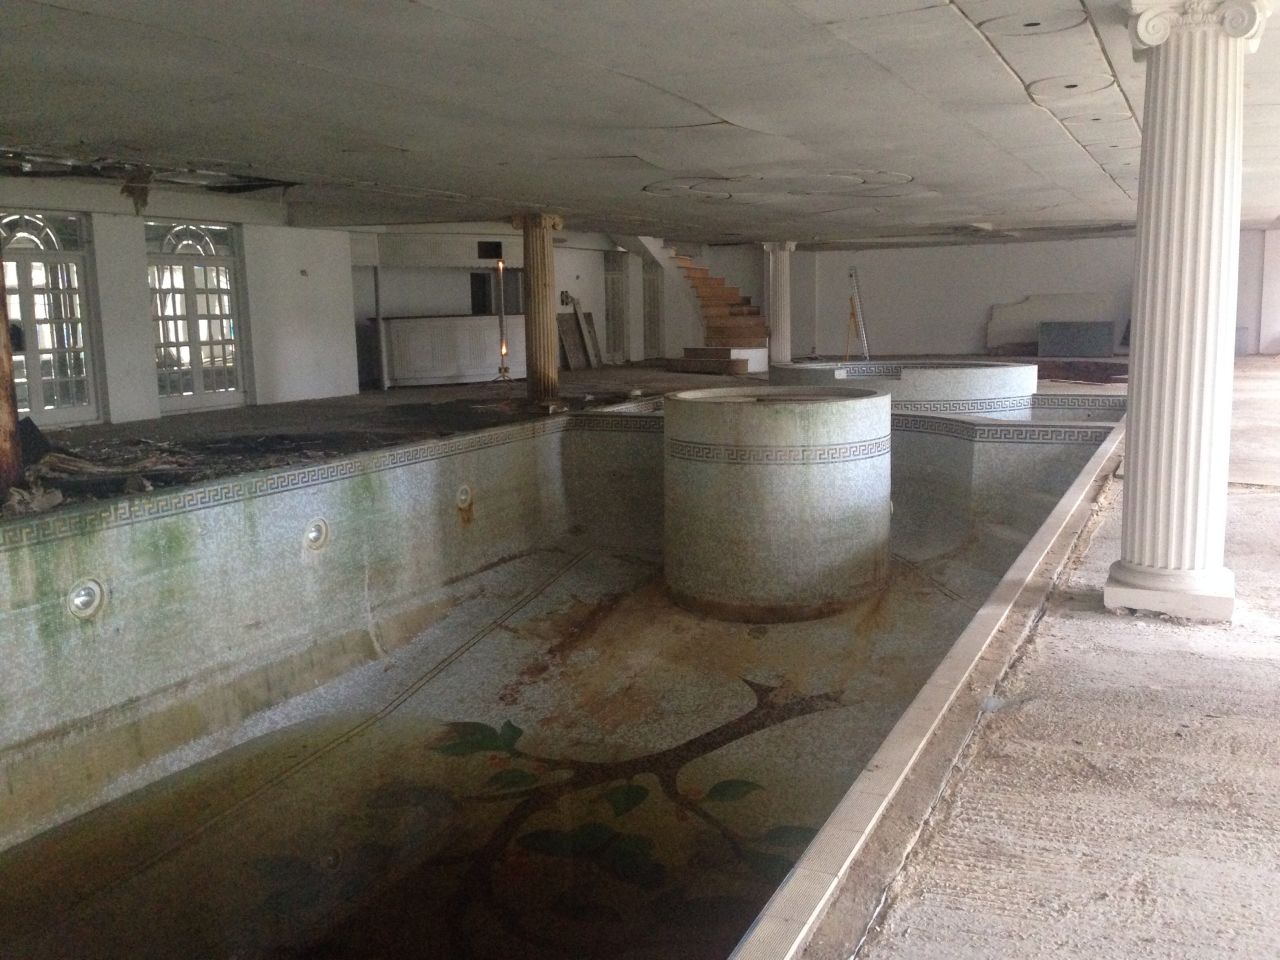 The grand swimming pool and jacuzzi in The Towers mansion have been left unused. 